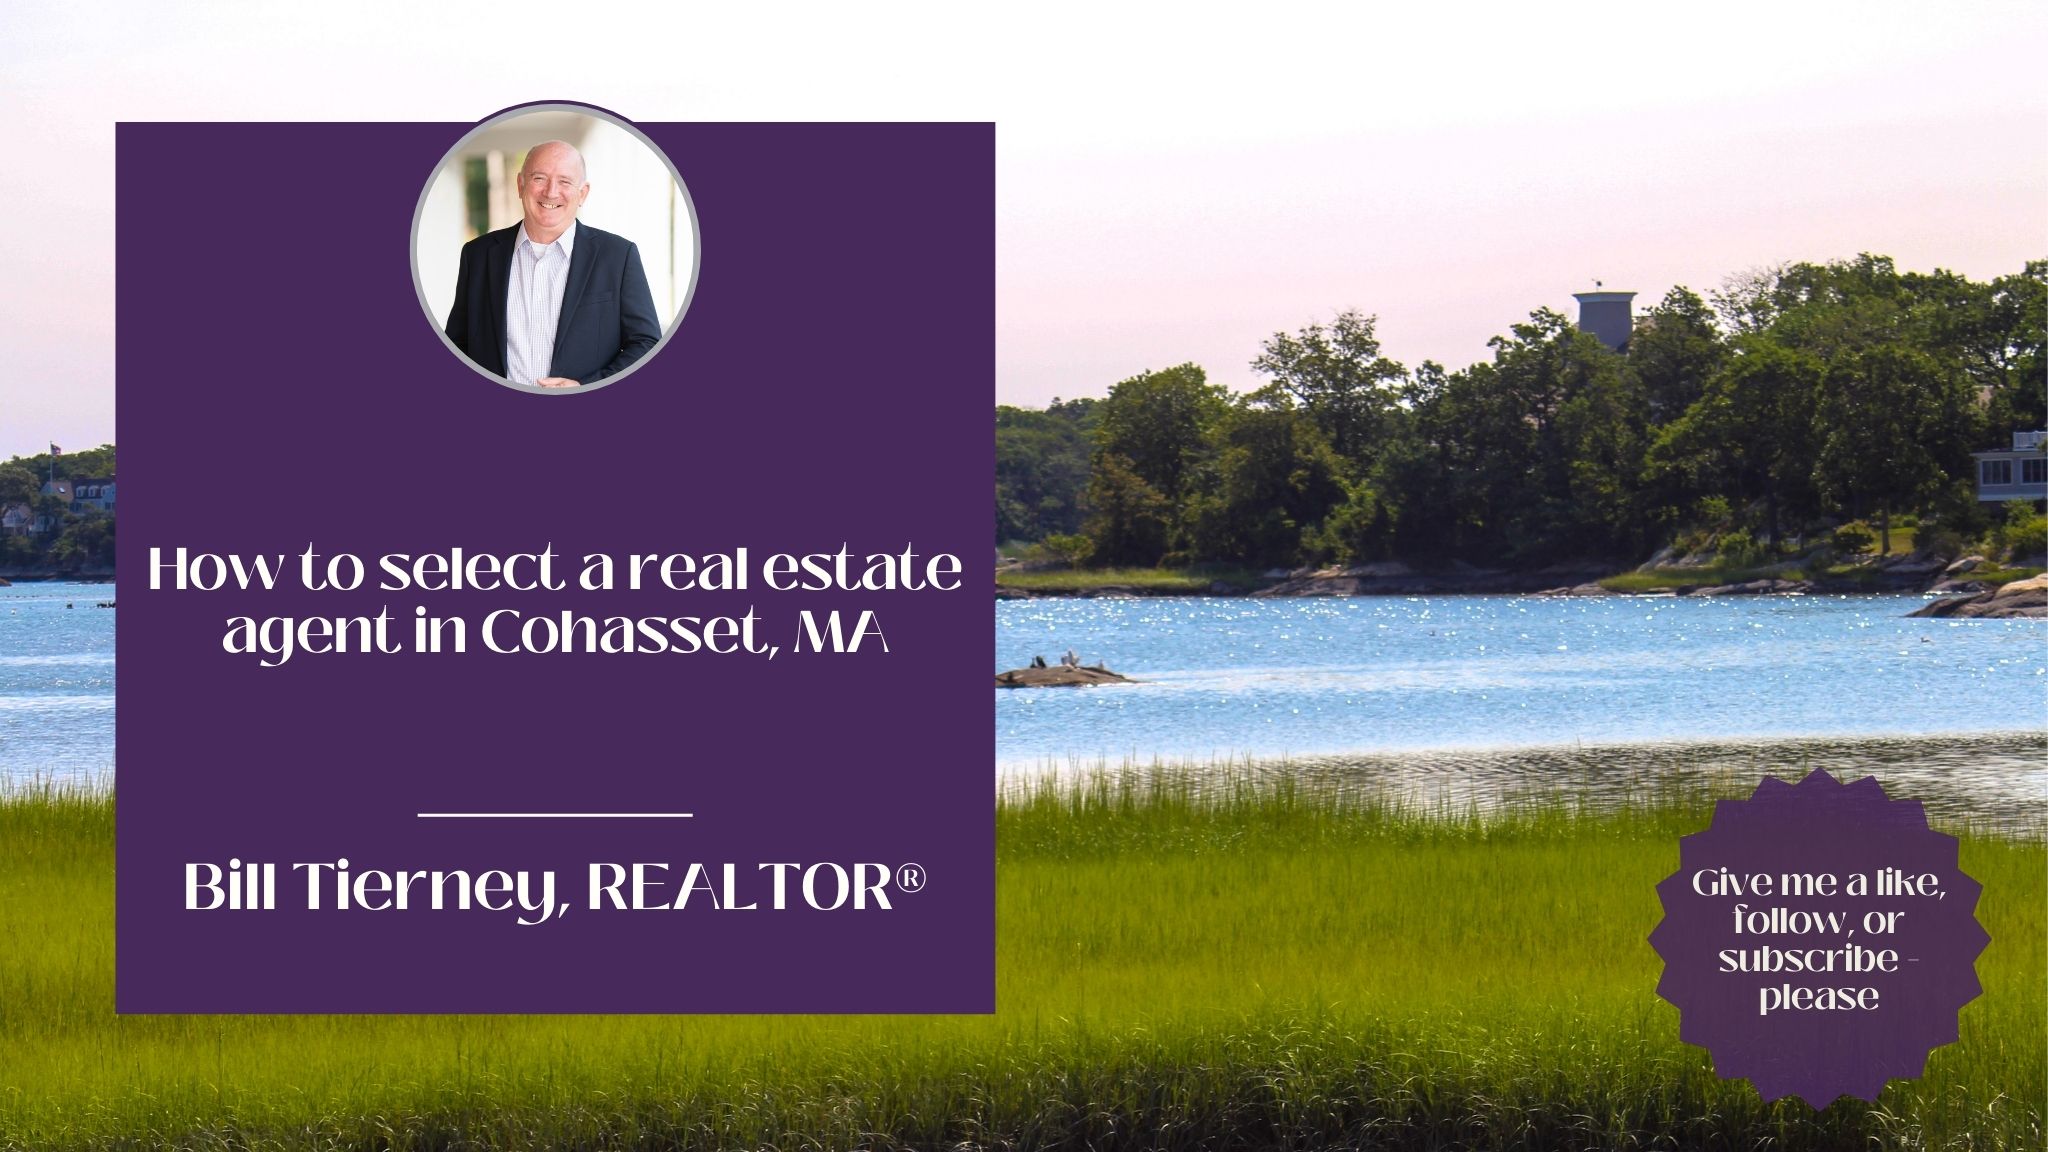 How to select the right real estate agent in Cohasset, MA